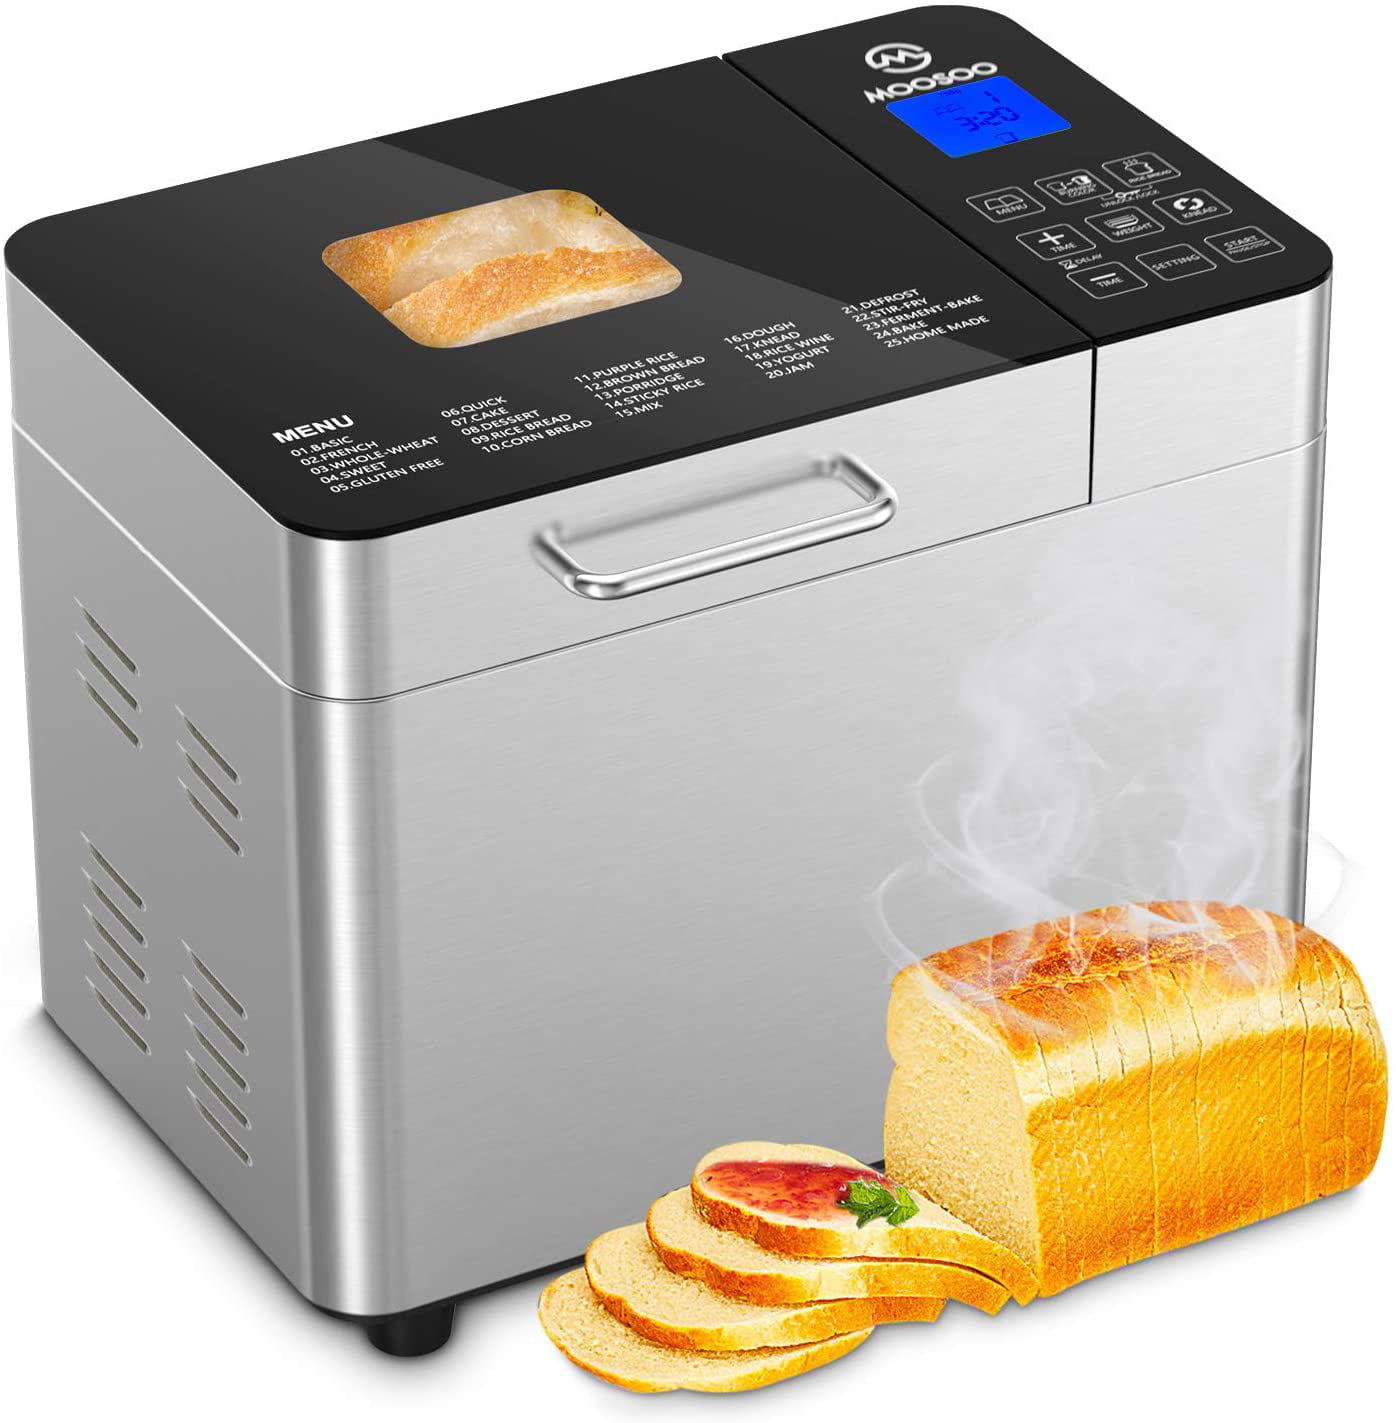 Moosoo 3.5 LB Bread Maker, 15 in 1 Auto Bread Machine with Gluten Free  Setting, LED Display, 15 Hours Timer Delay, White